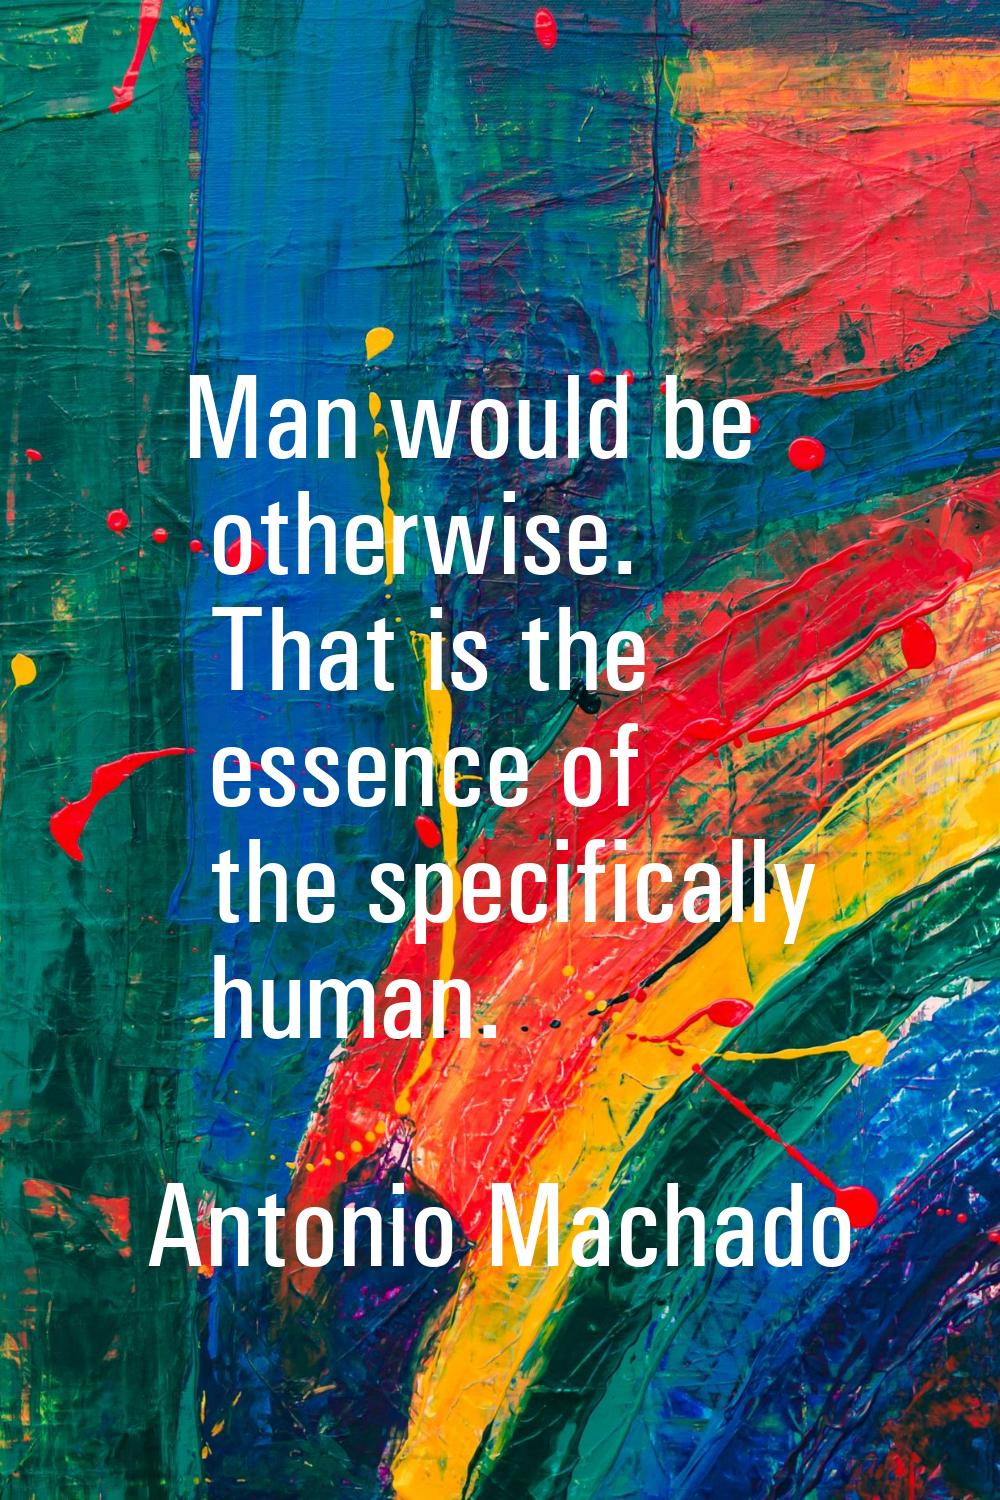 Man would be otherwise. That is the essence of the specifically human.